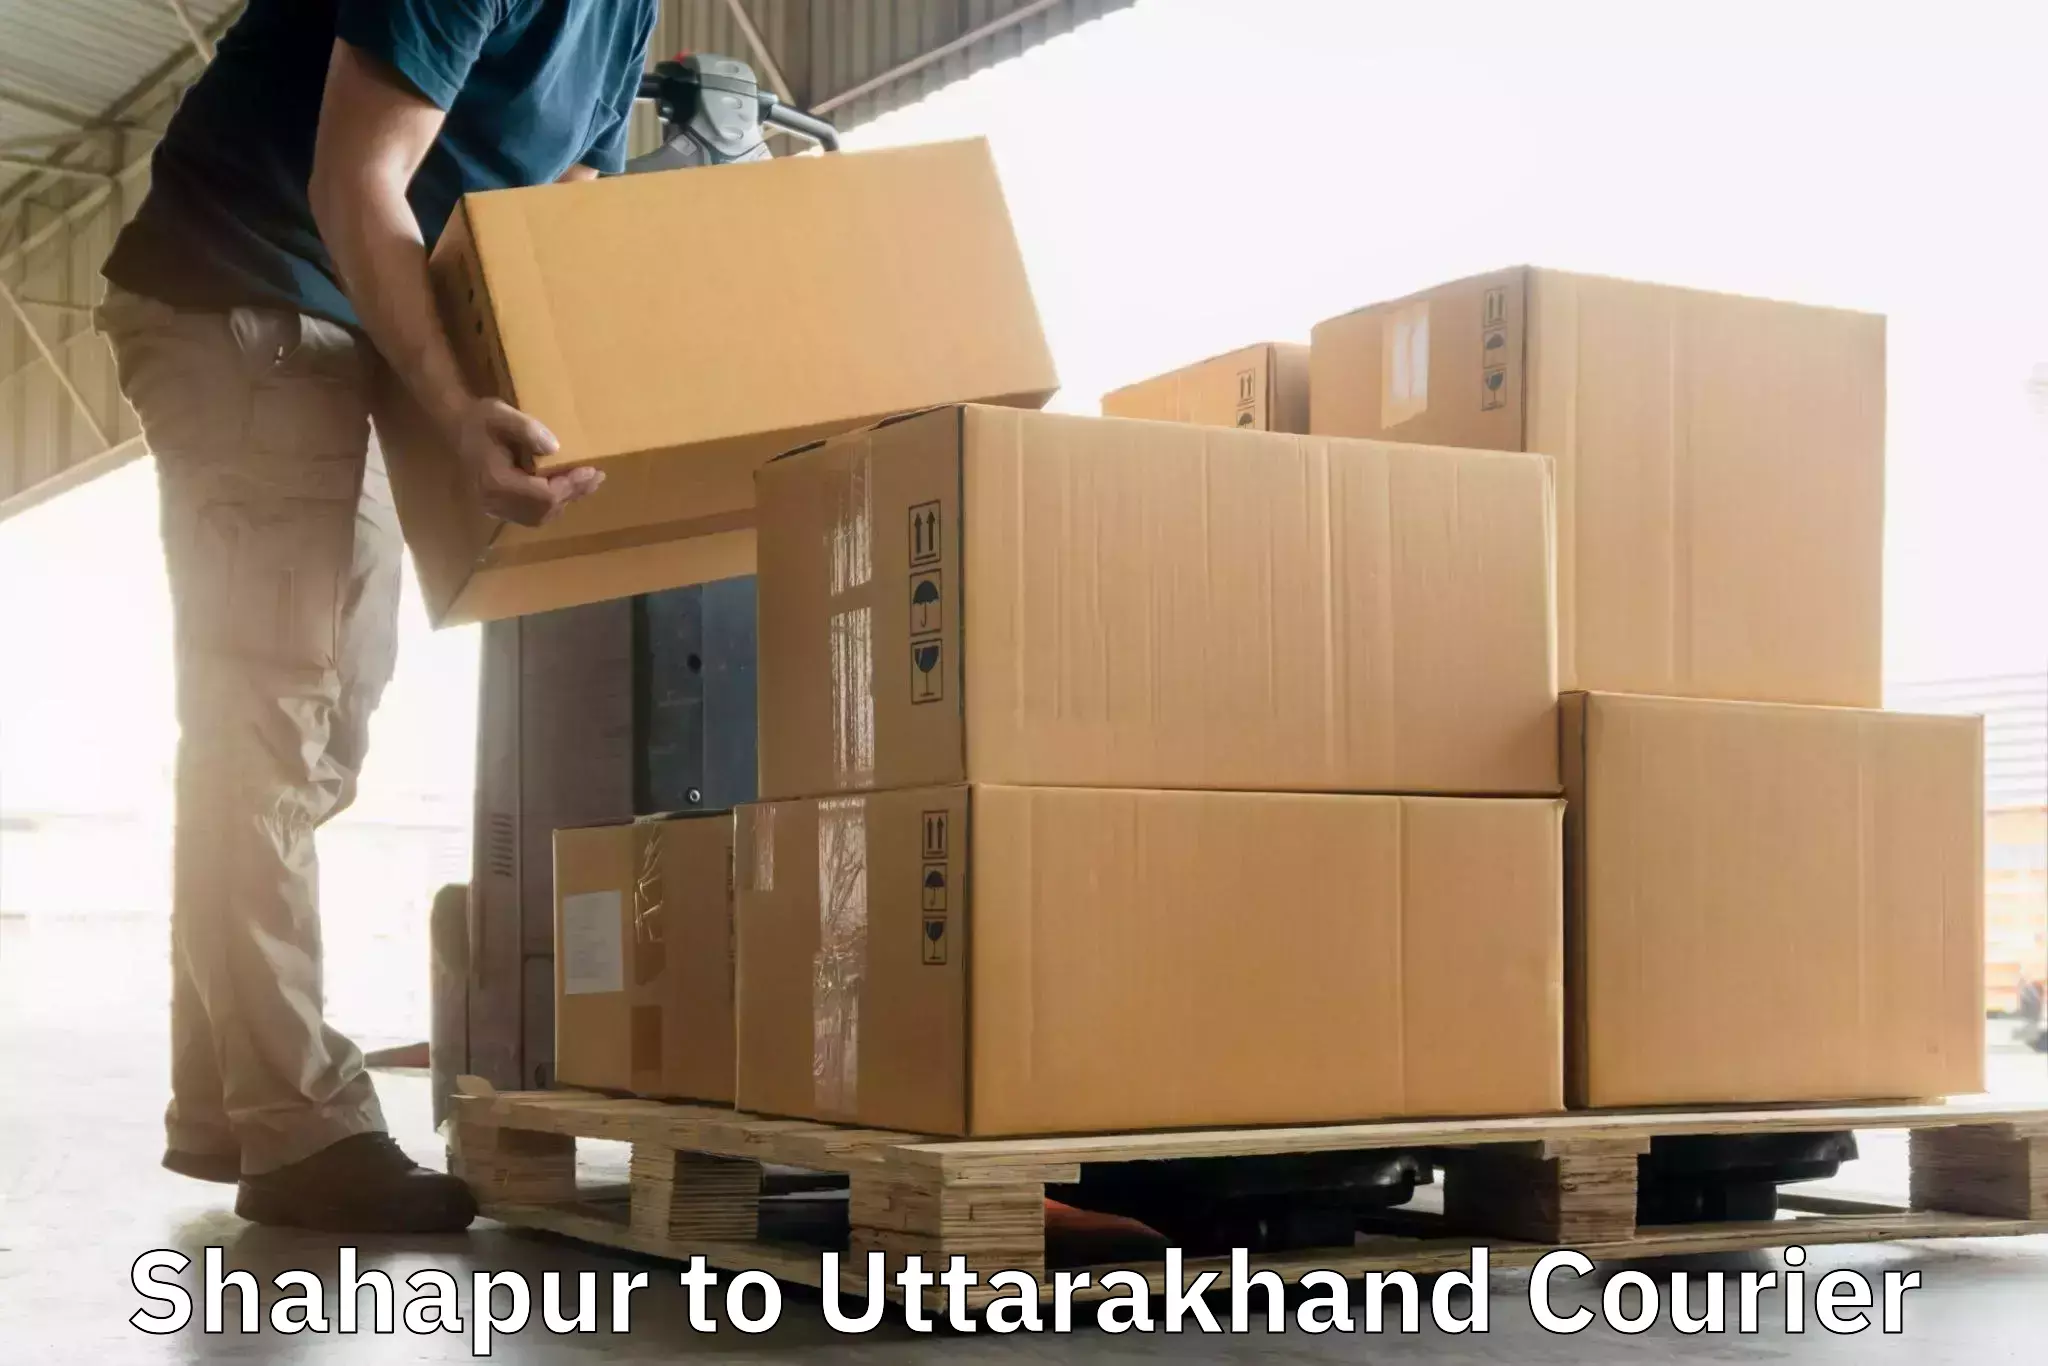 Supply chain efficiency in Shahapur to Tehri Garhwal